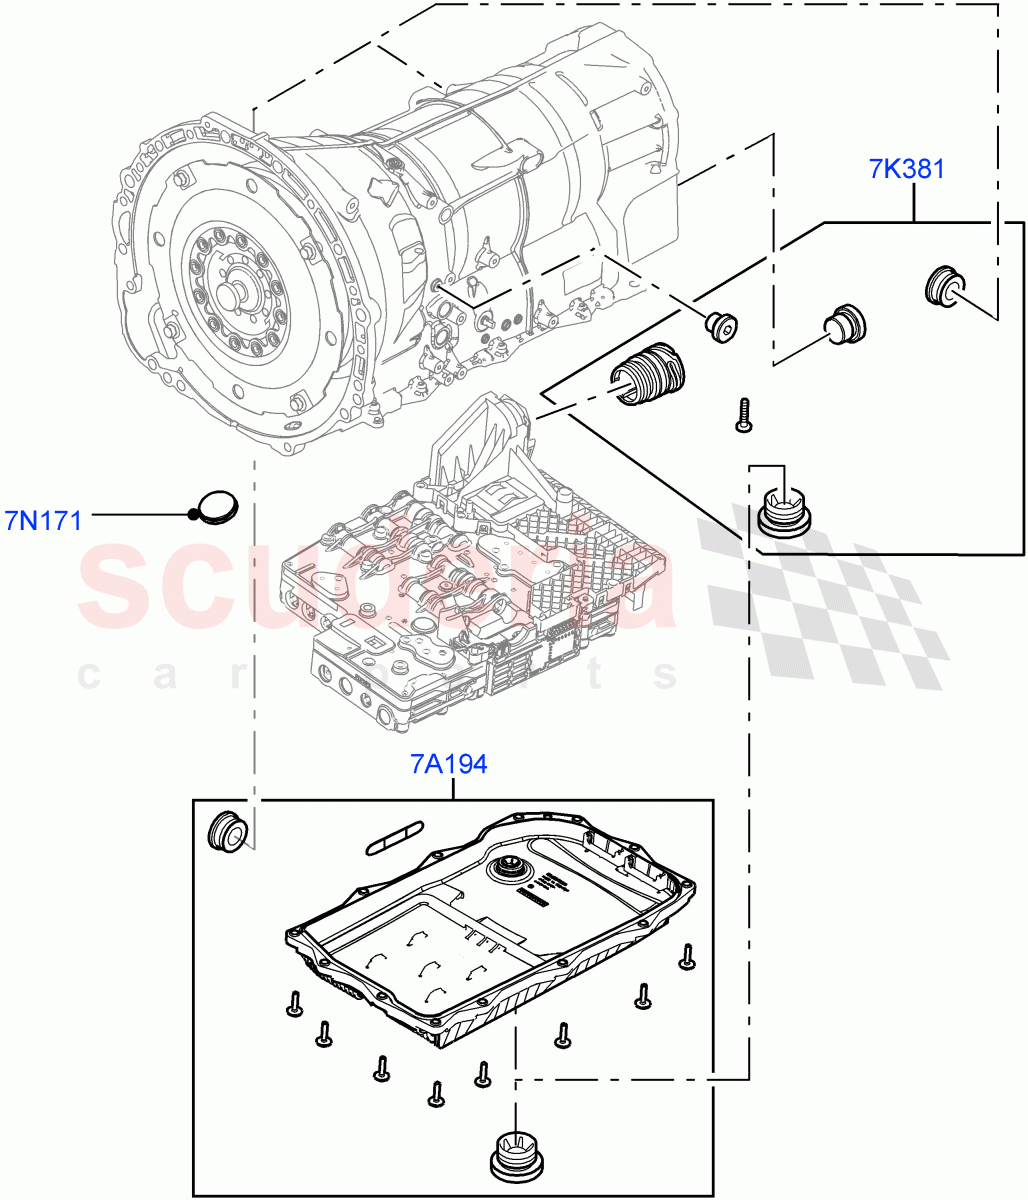 Transmission External Components(Nitra Plant Build)(2.0L I4 DSL HIGH DOHC AJ200,8 Speed Auto Trans ZF 8HP70 4WD,5.0 Petrol AJ133 DOHC CDA)((V)FROMK2000001) of Land Rover Land Rover Discovery 5 (2017+) [3.0 Diesel 24V DOHC TC]